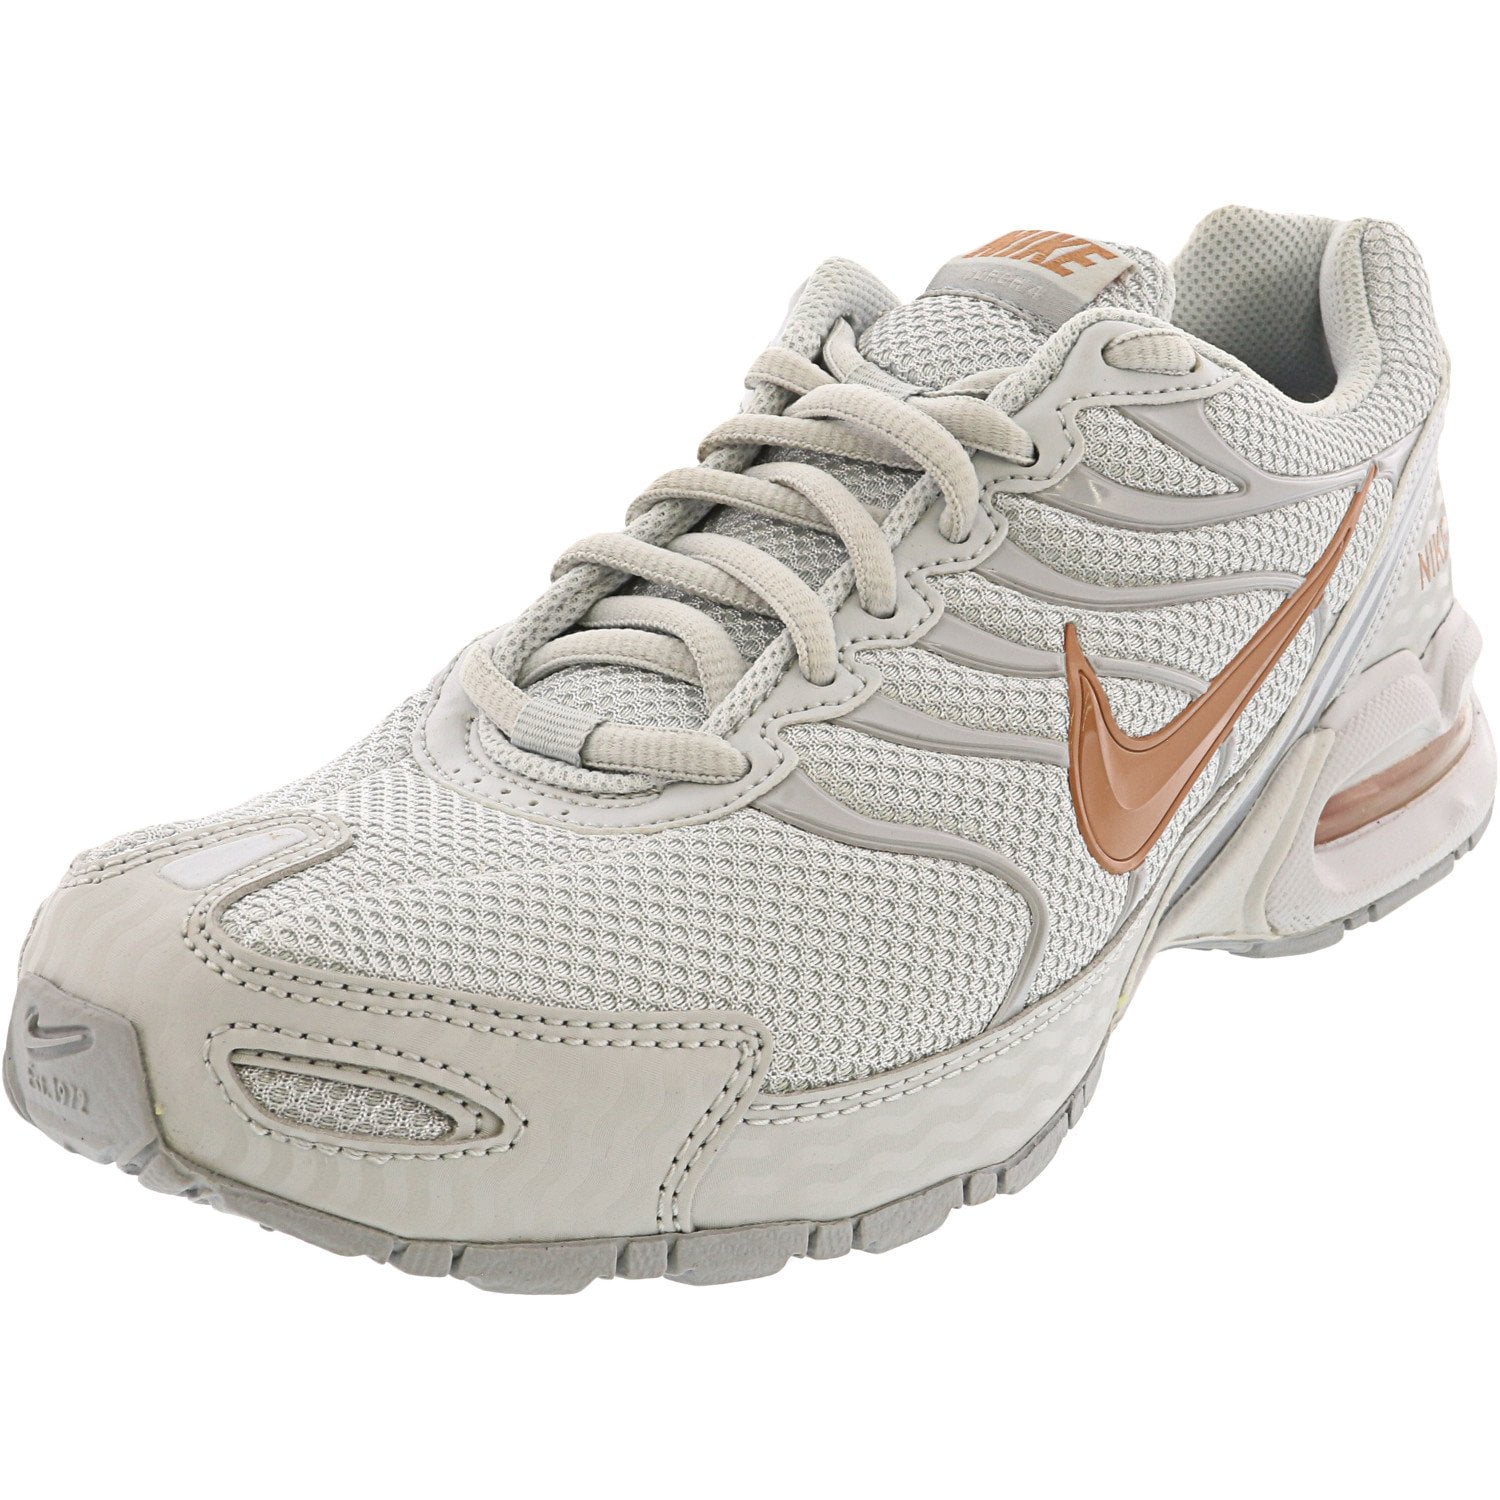 grey and rose gold nike shoes